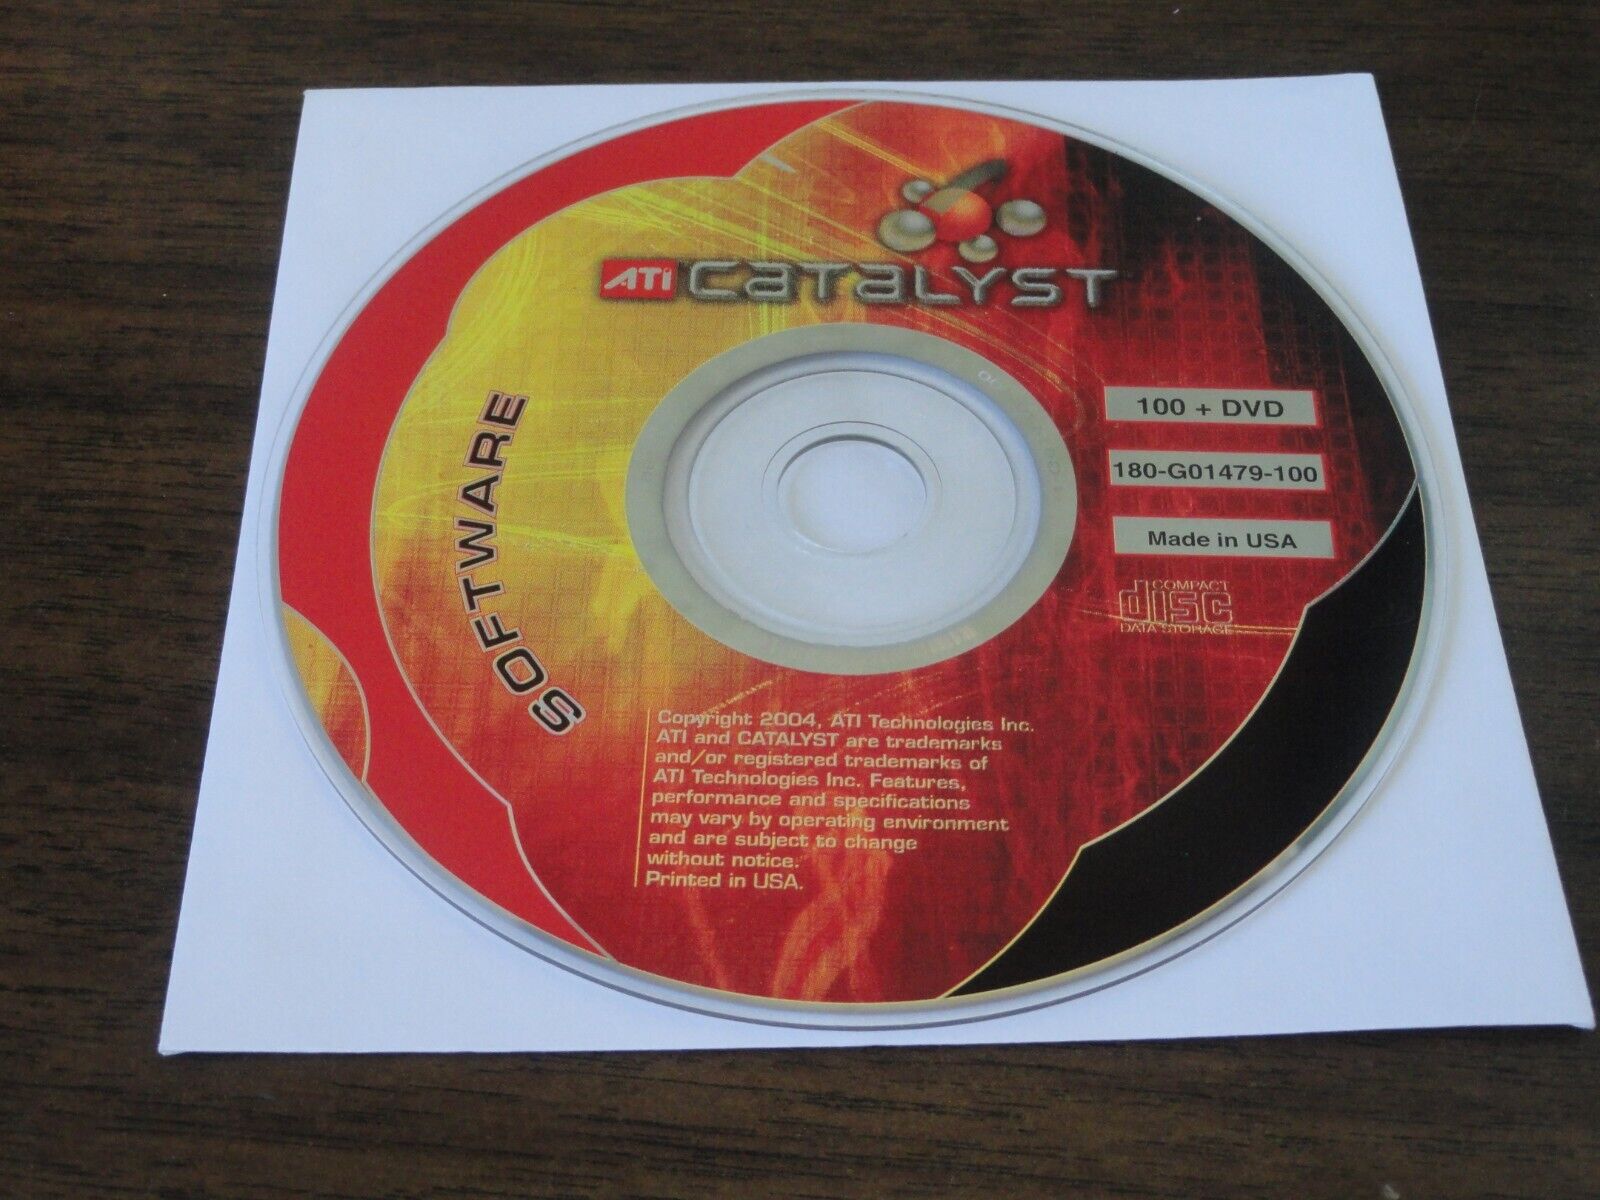 VINTAGE ATI CATALYST 2004 SOFTWARE - 180-GO1479-100 – 100 + DVD – DISK ONLY